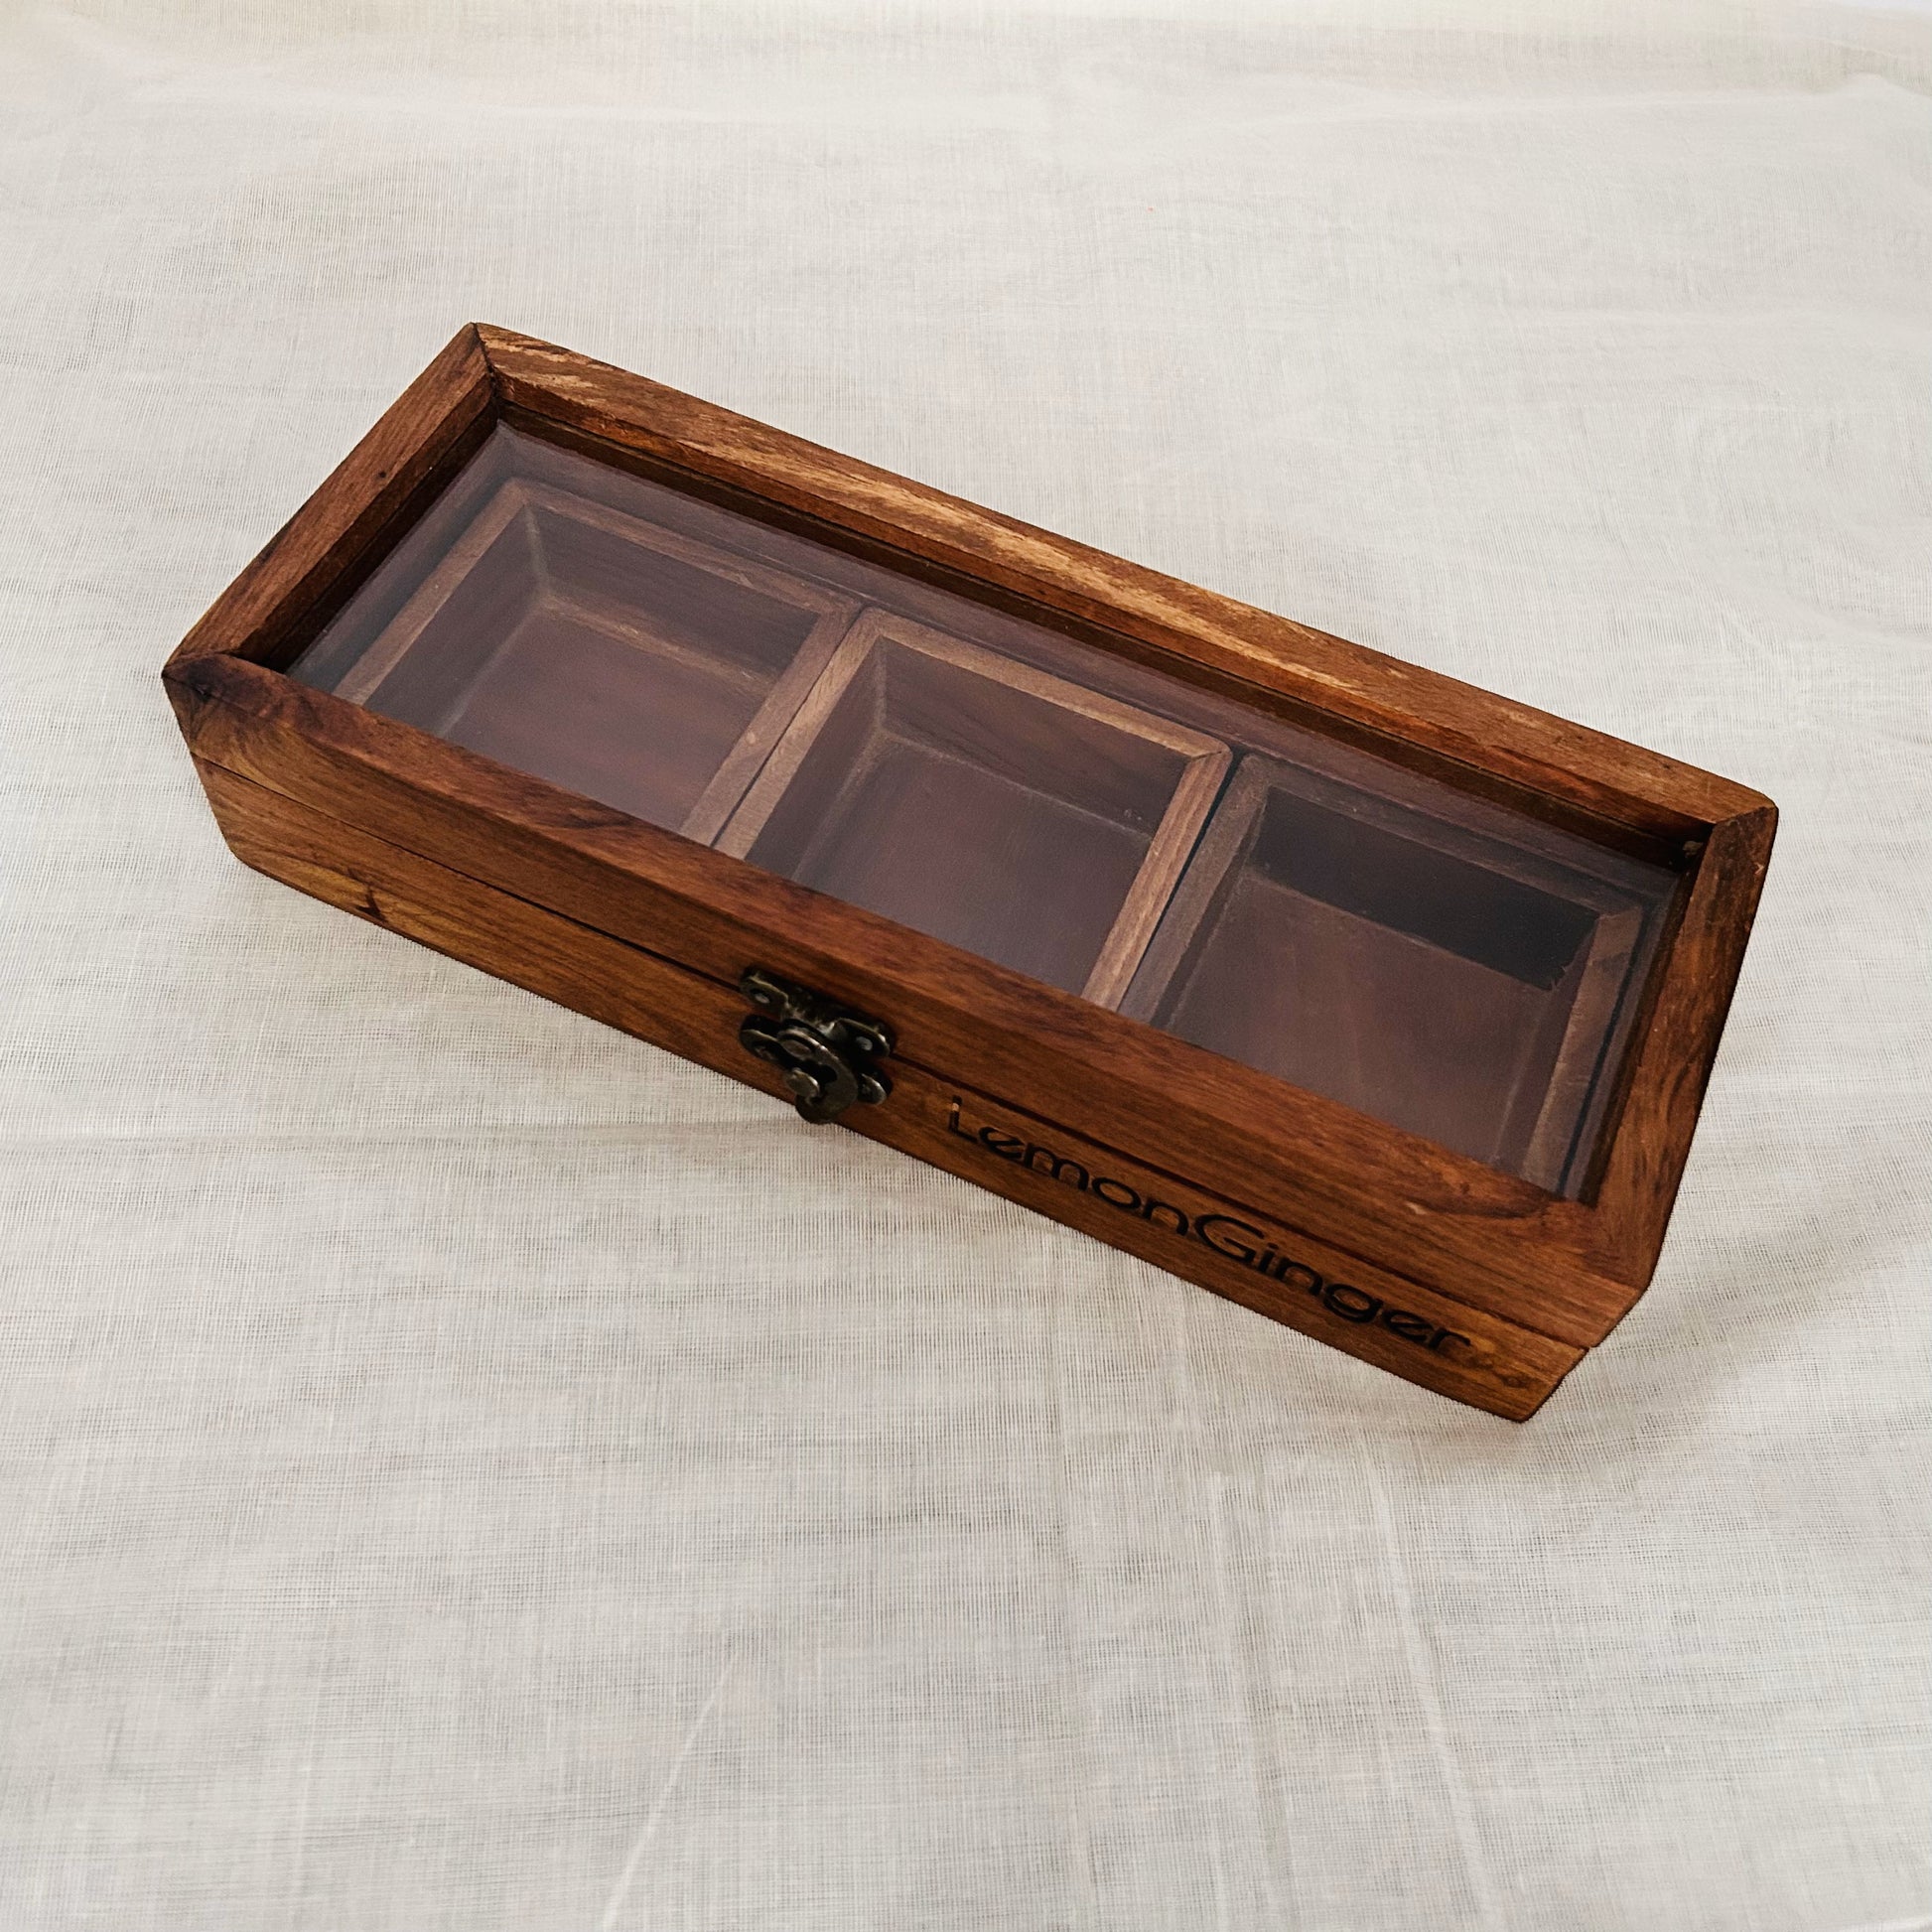 Rectangular Wooden Masala Box, Multi utility wooden box for storage, Dry fruit box, Spice box. Beautiful long rectangular box that has 3 square compartments or wooden square boxes that can be used to store masala, spices, dry fruits, or jewelry, and trinkets. Perfect gift for kids, wife, husband, friends, and all those who love to host, organize and decorate their house. Perfectly designed to add beauty and elegance to your coffee table, teapoy, kitchen, and dining rooms.